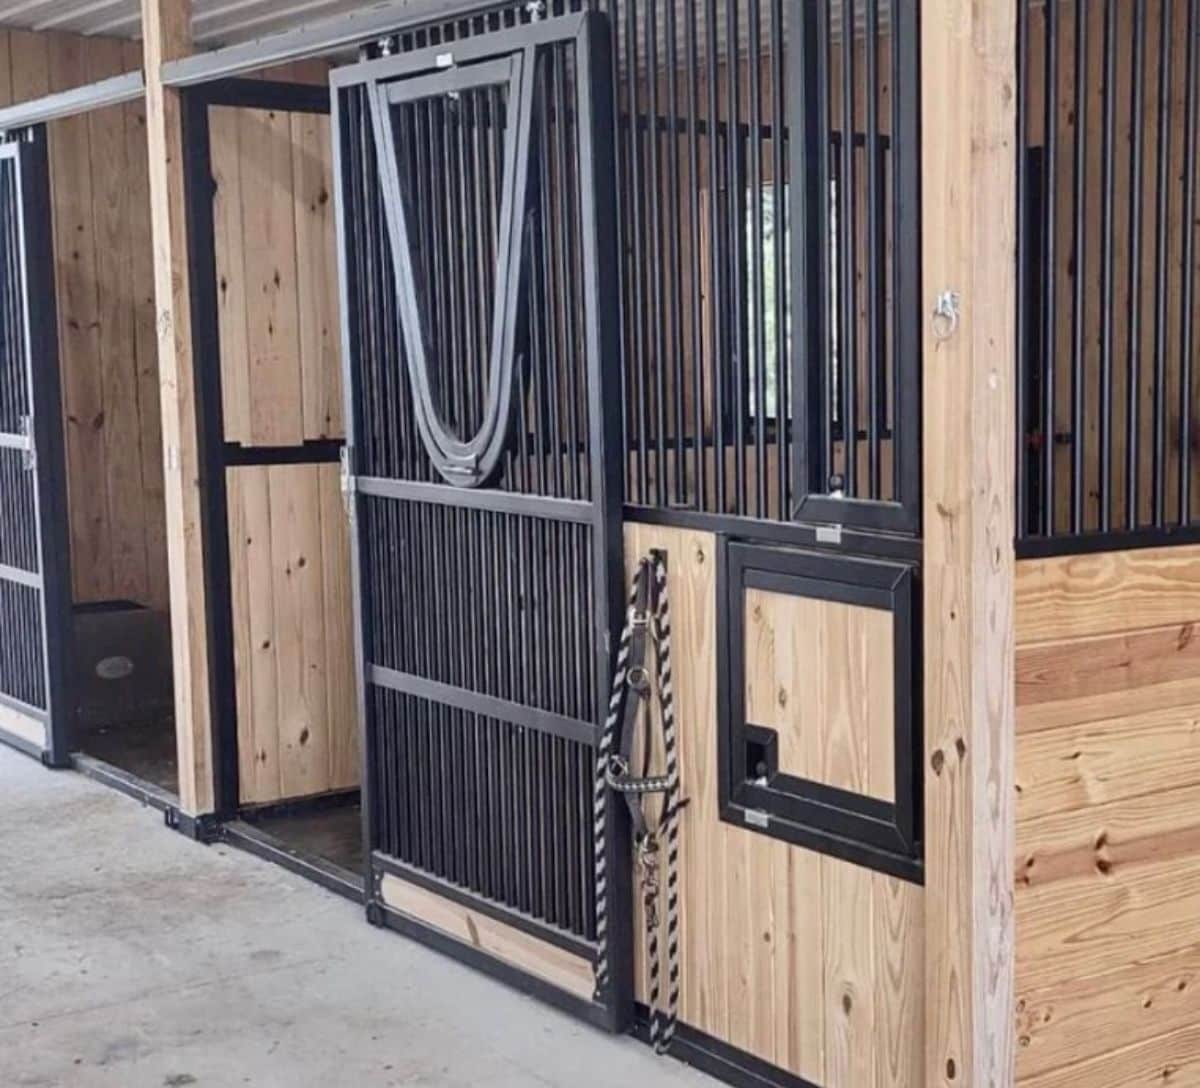 A wooden horse stall with a metal gate.